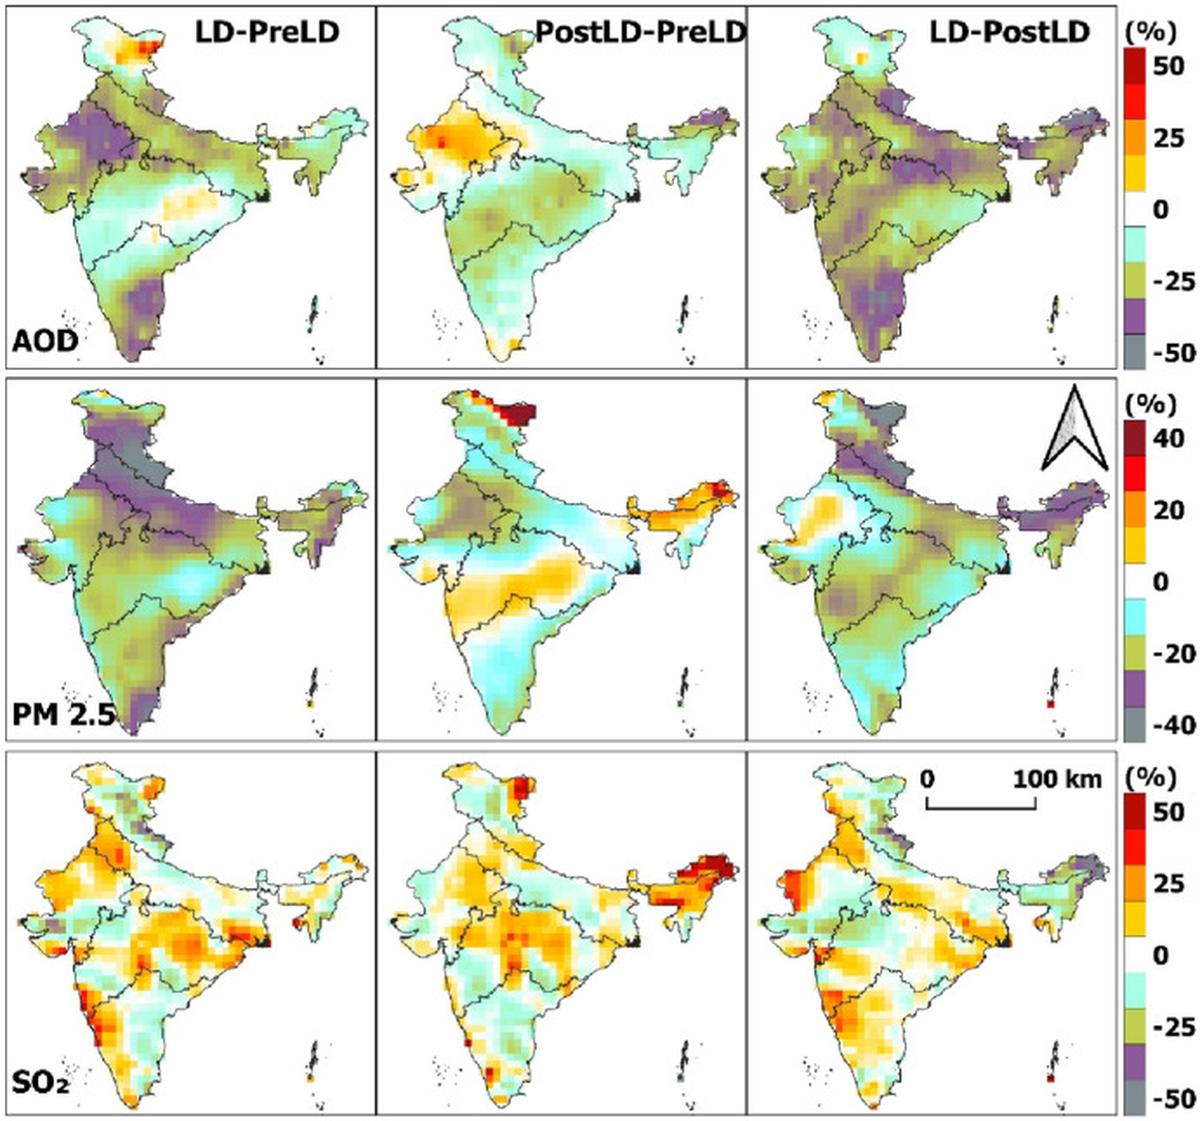 Percentage change in aerosol optical depth, PM 2.5, and sulphur dioxide over India for the three time periods: lockdown (2020) – pre-lockdown (2017–2019); post-lockdown (2021) – pre-lockdown (2017–2019); and lockdown (2020) – post-lockdown (2021). 